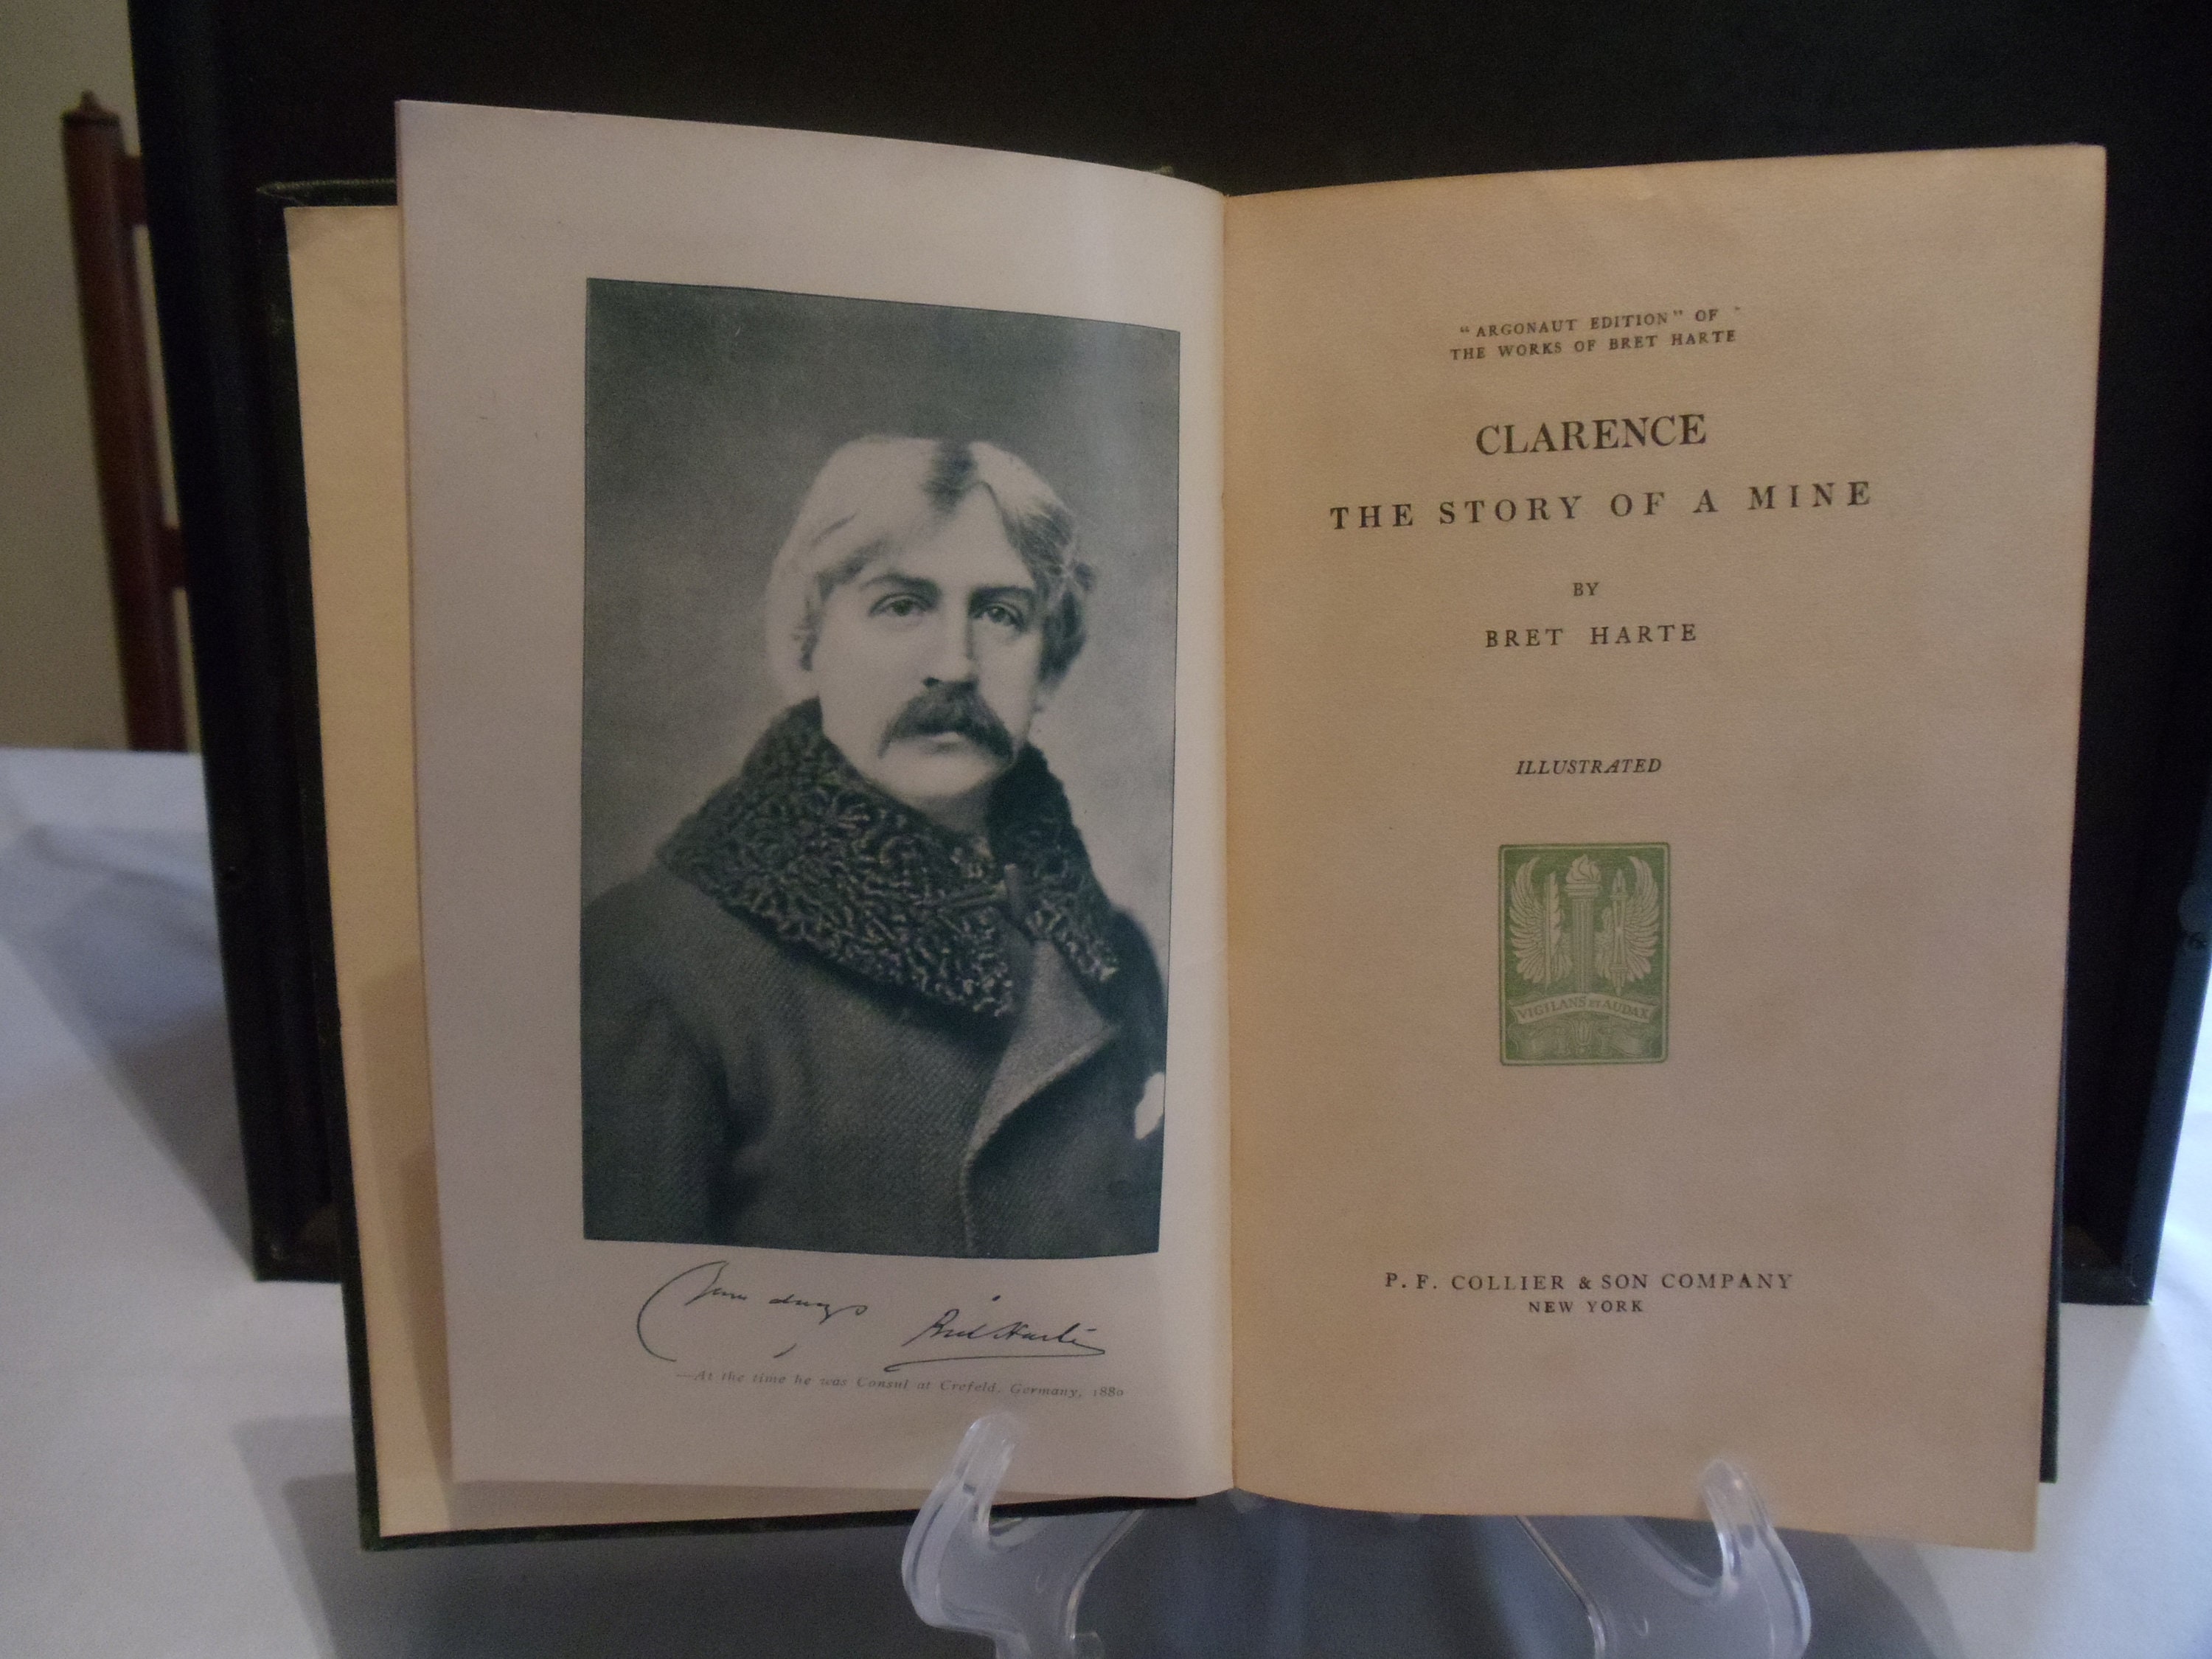 Clarence the Story of a Mine by Bret Harte P.F. Collier & Son New York 1905  